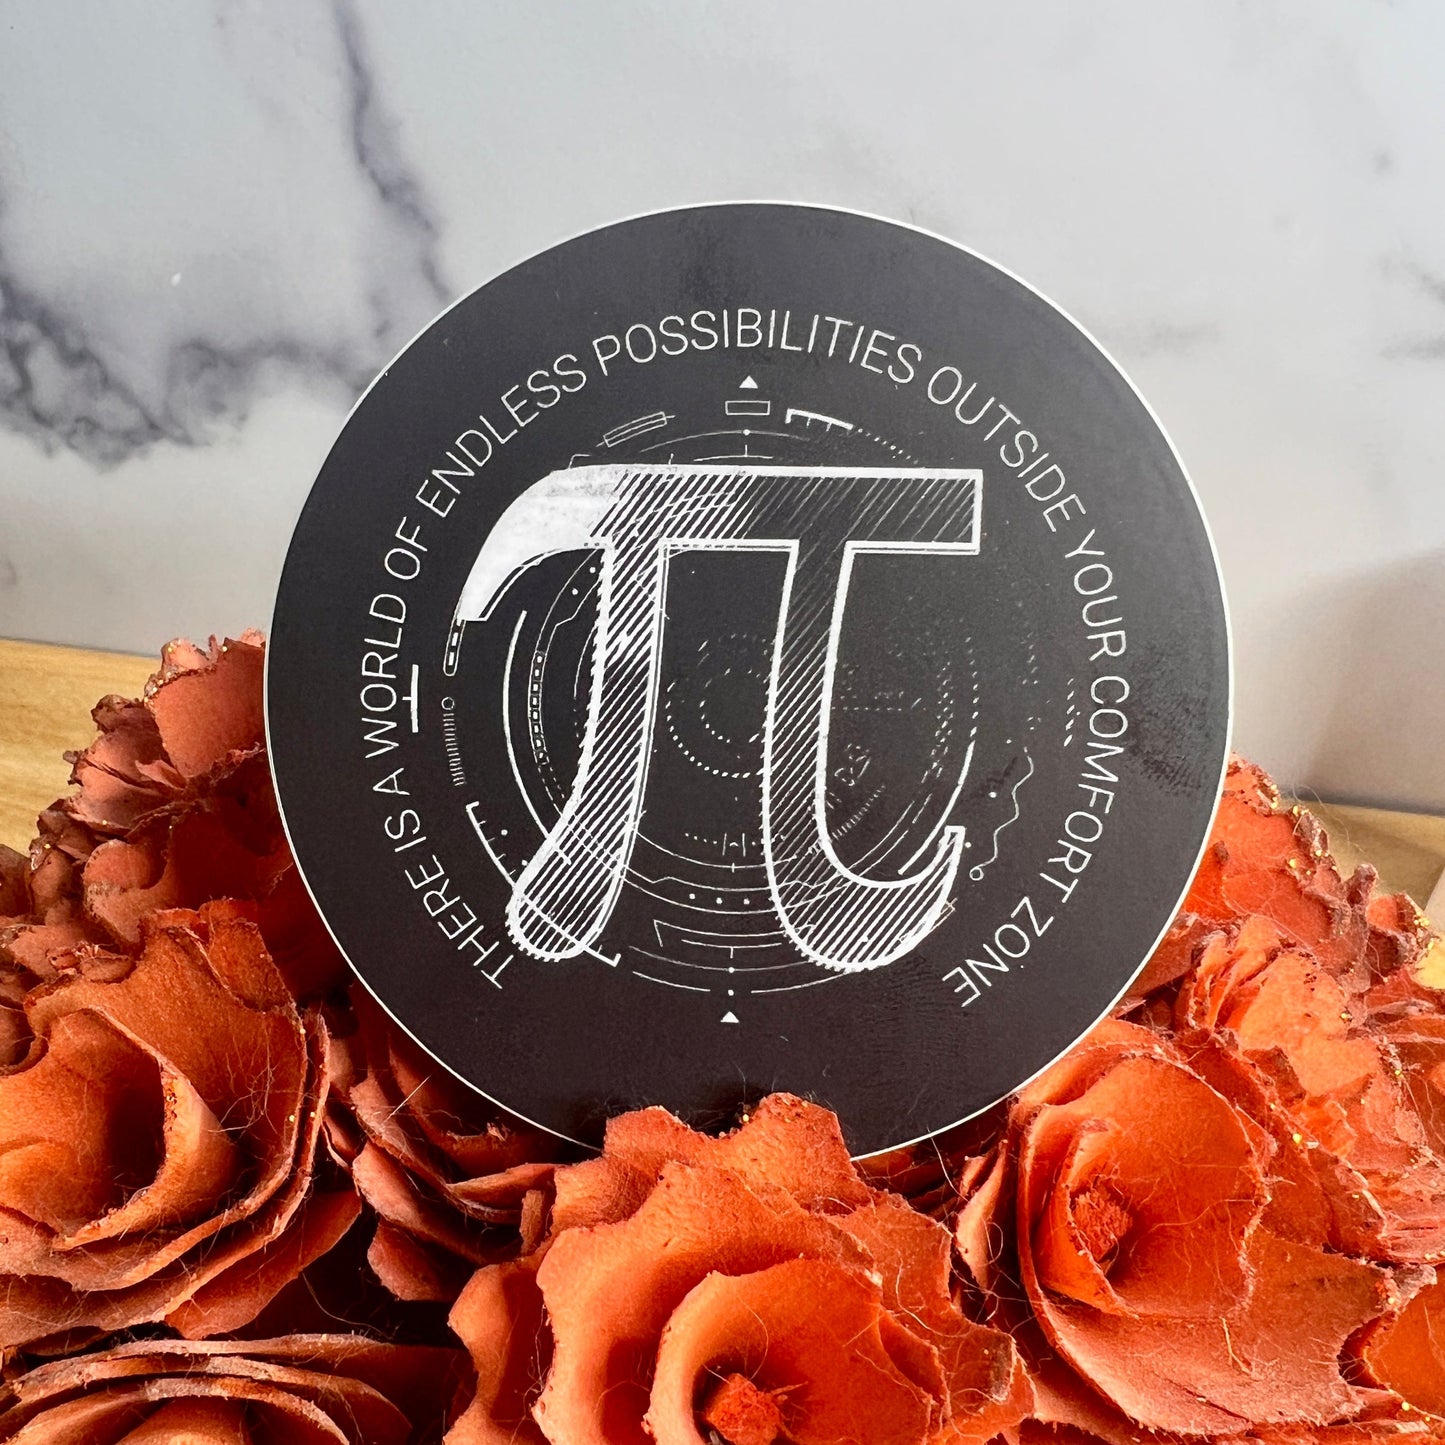 "Pi-There is a World of Endless Possibilities" Waterproof Sticker Decal